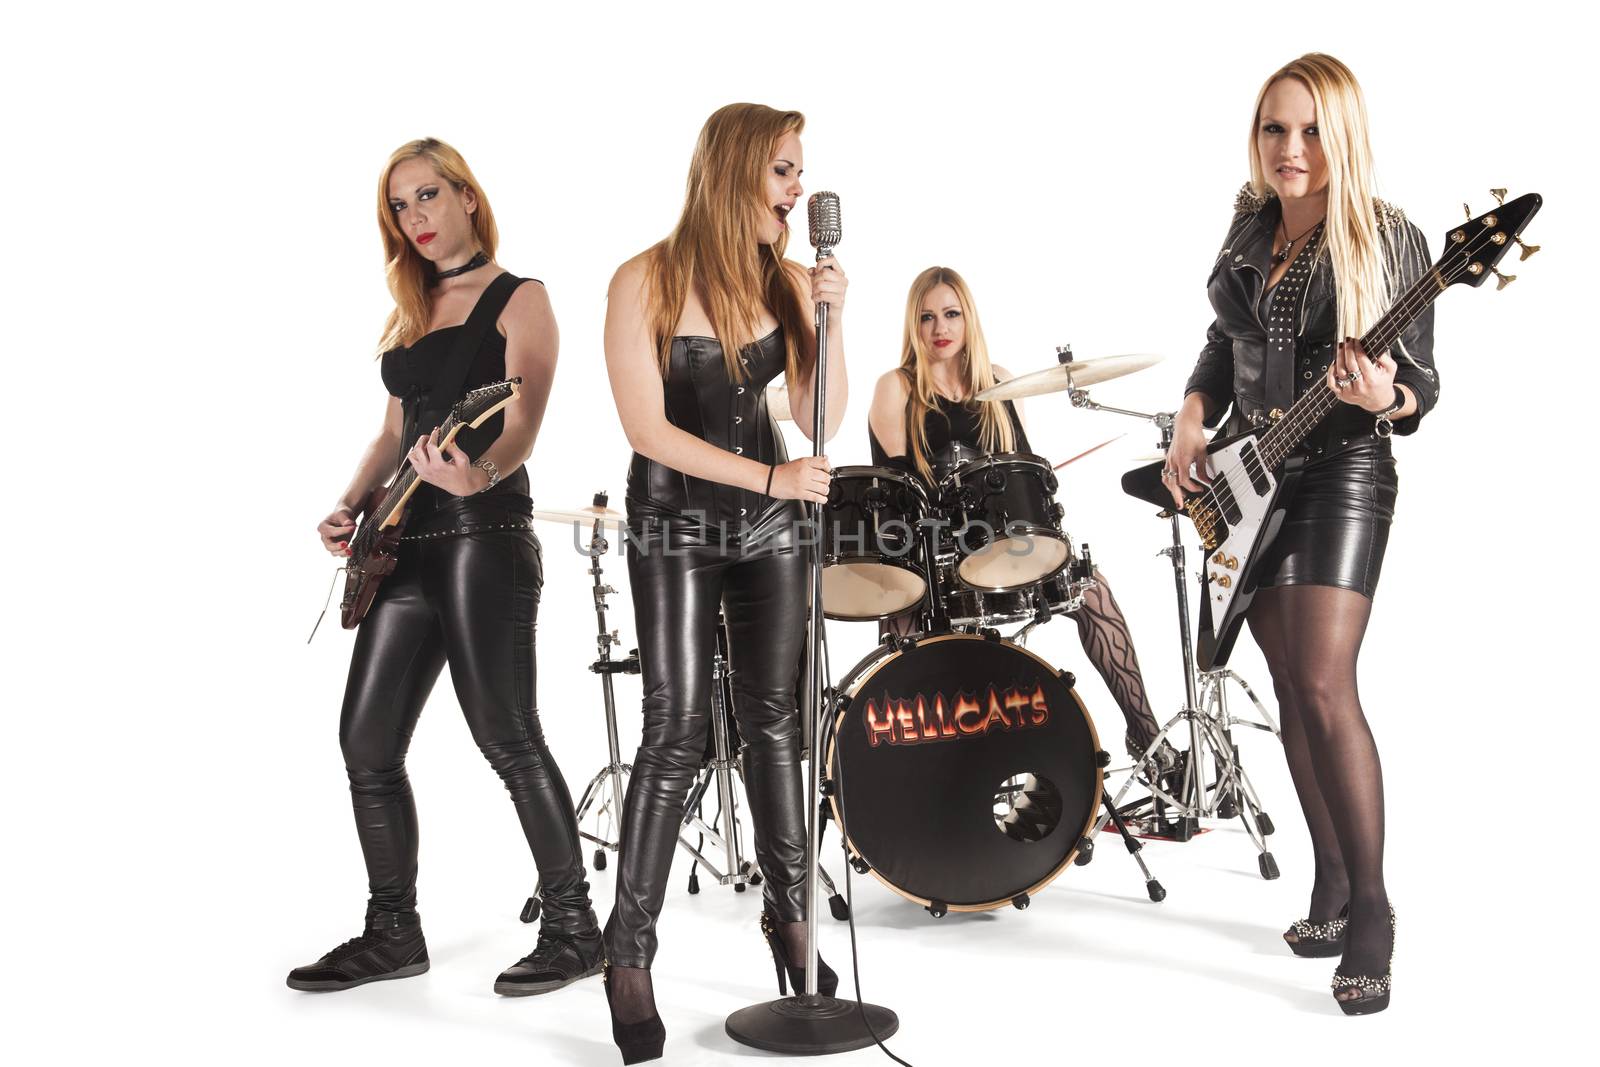 Portrait of female music band by Aarstudio